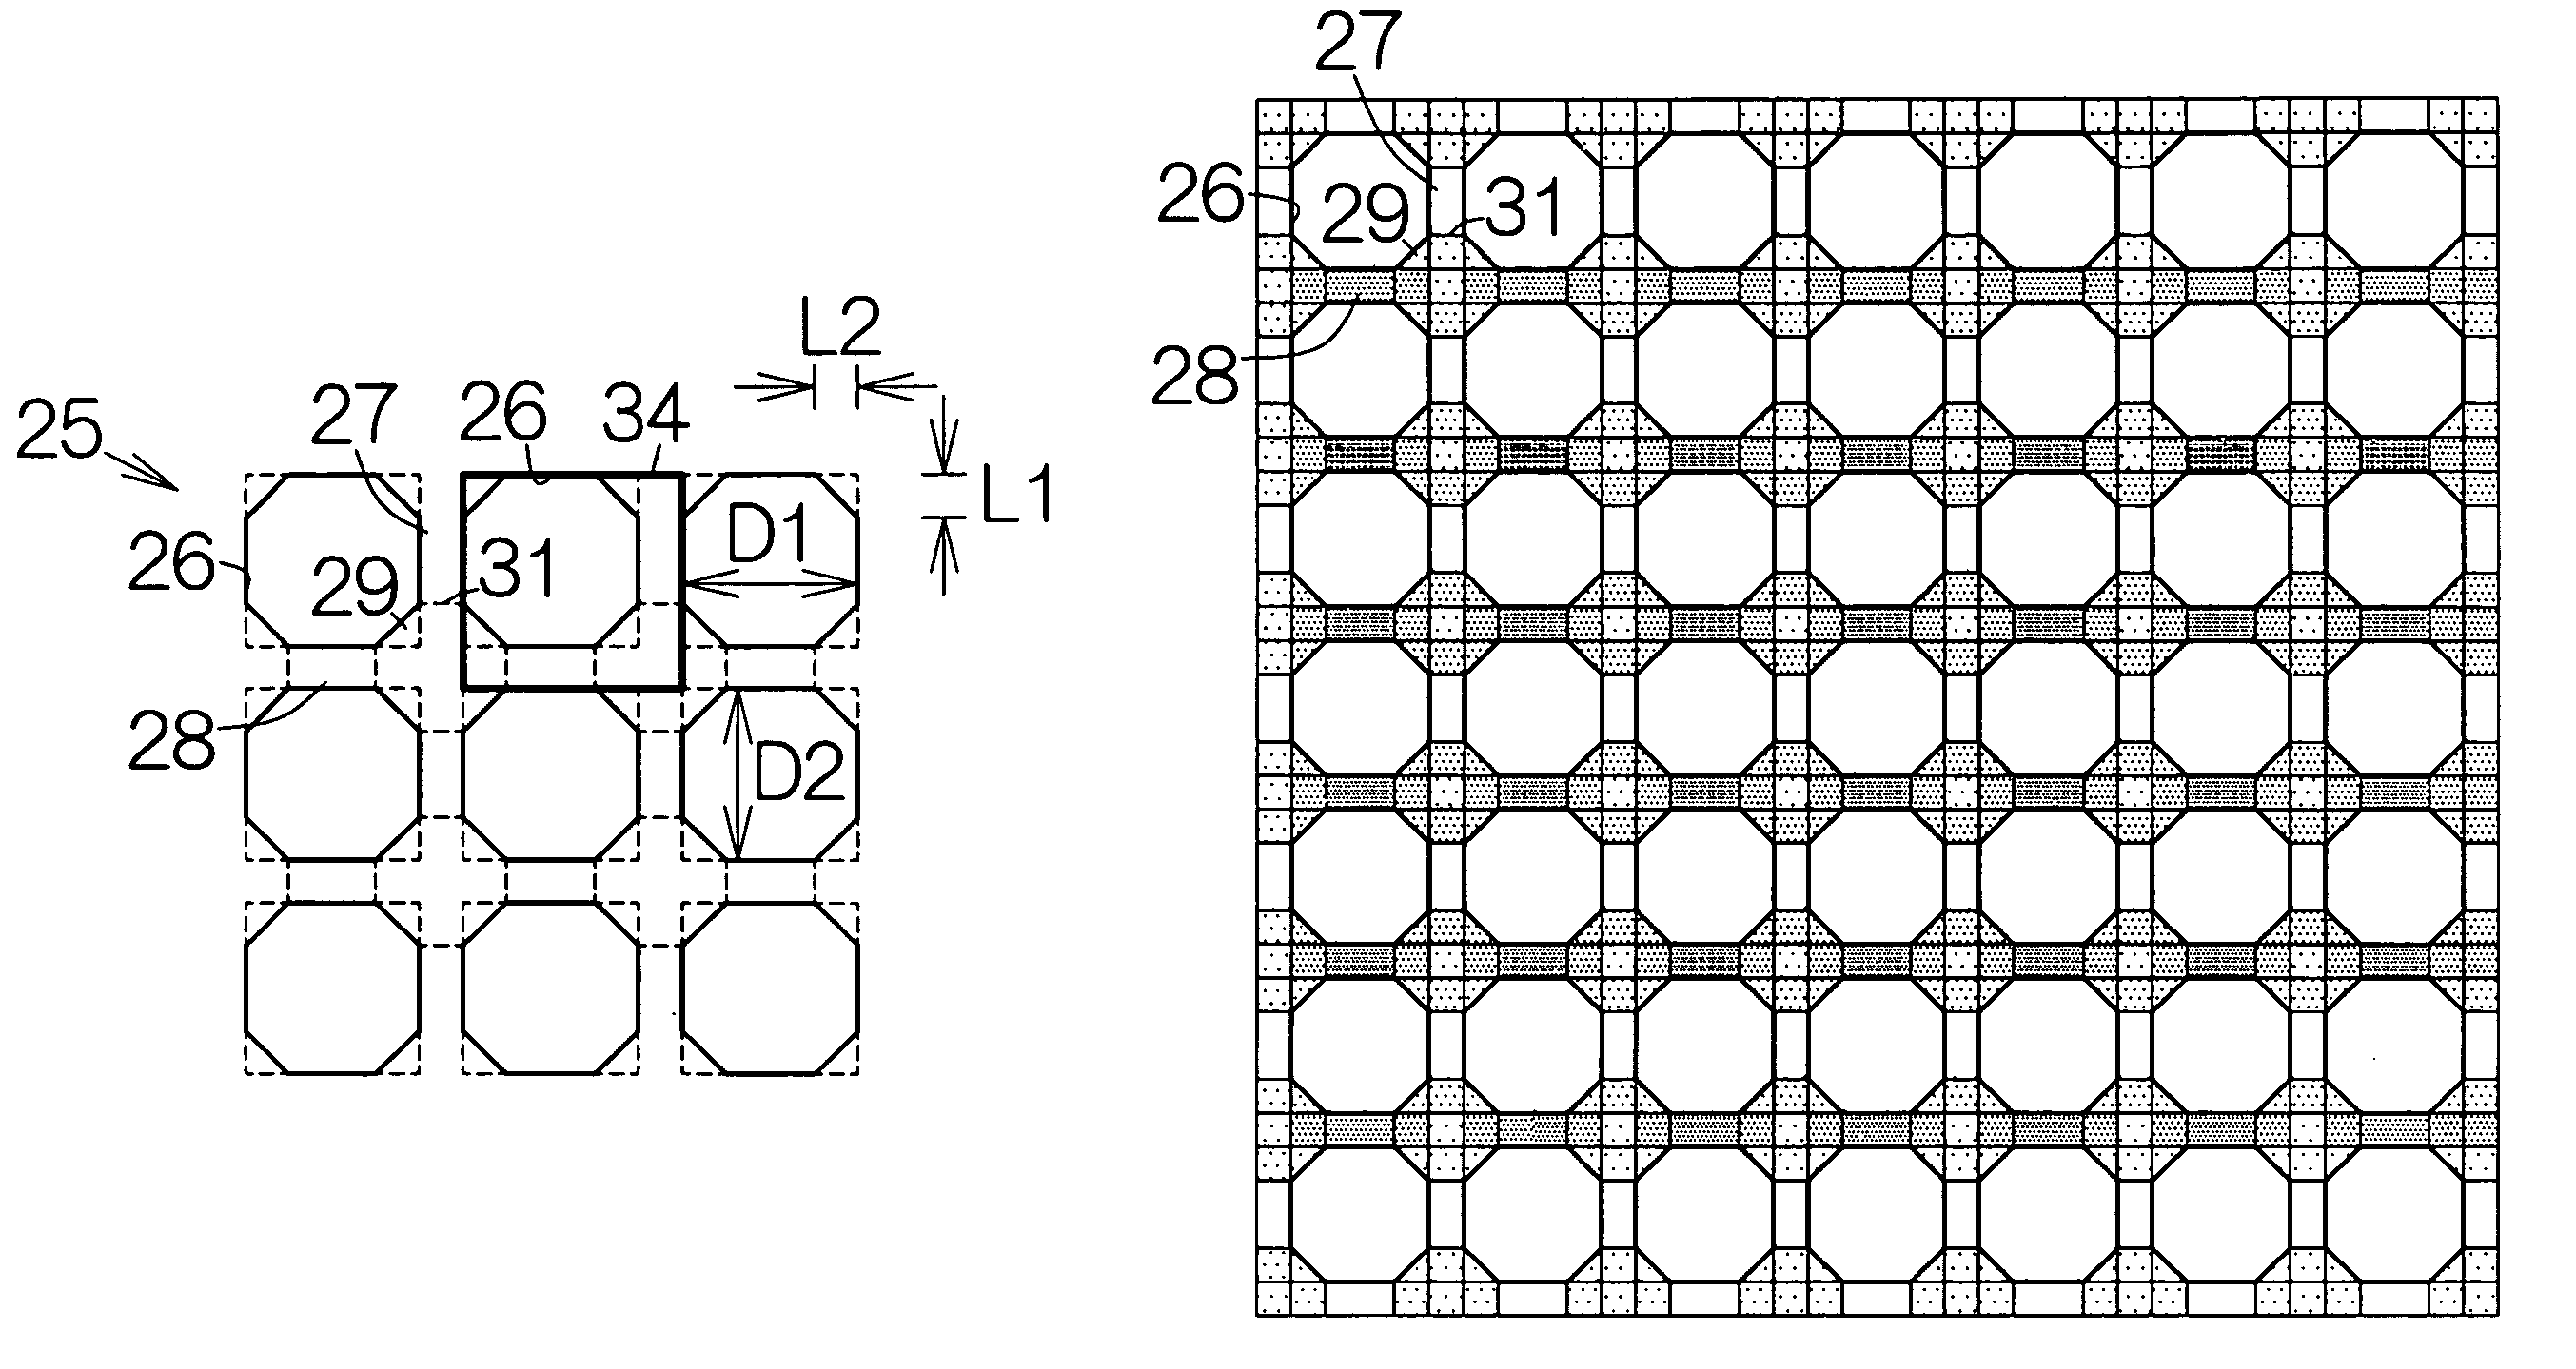 Vent grid and electronic apparatus employing the same